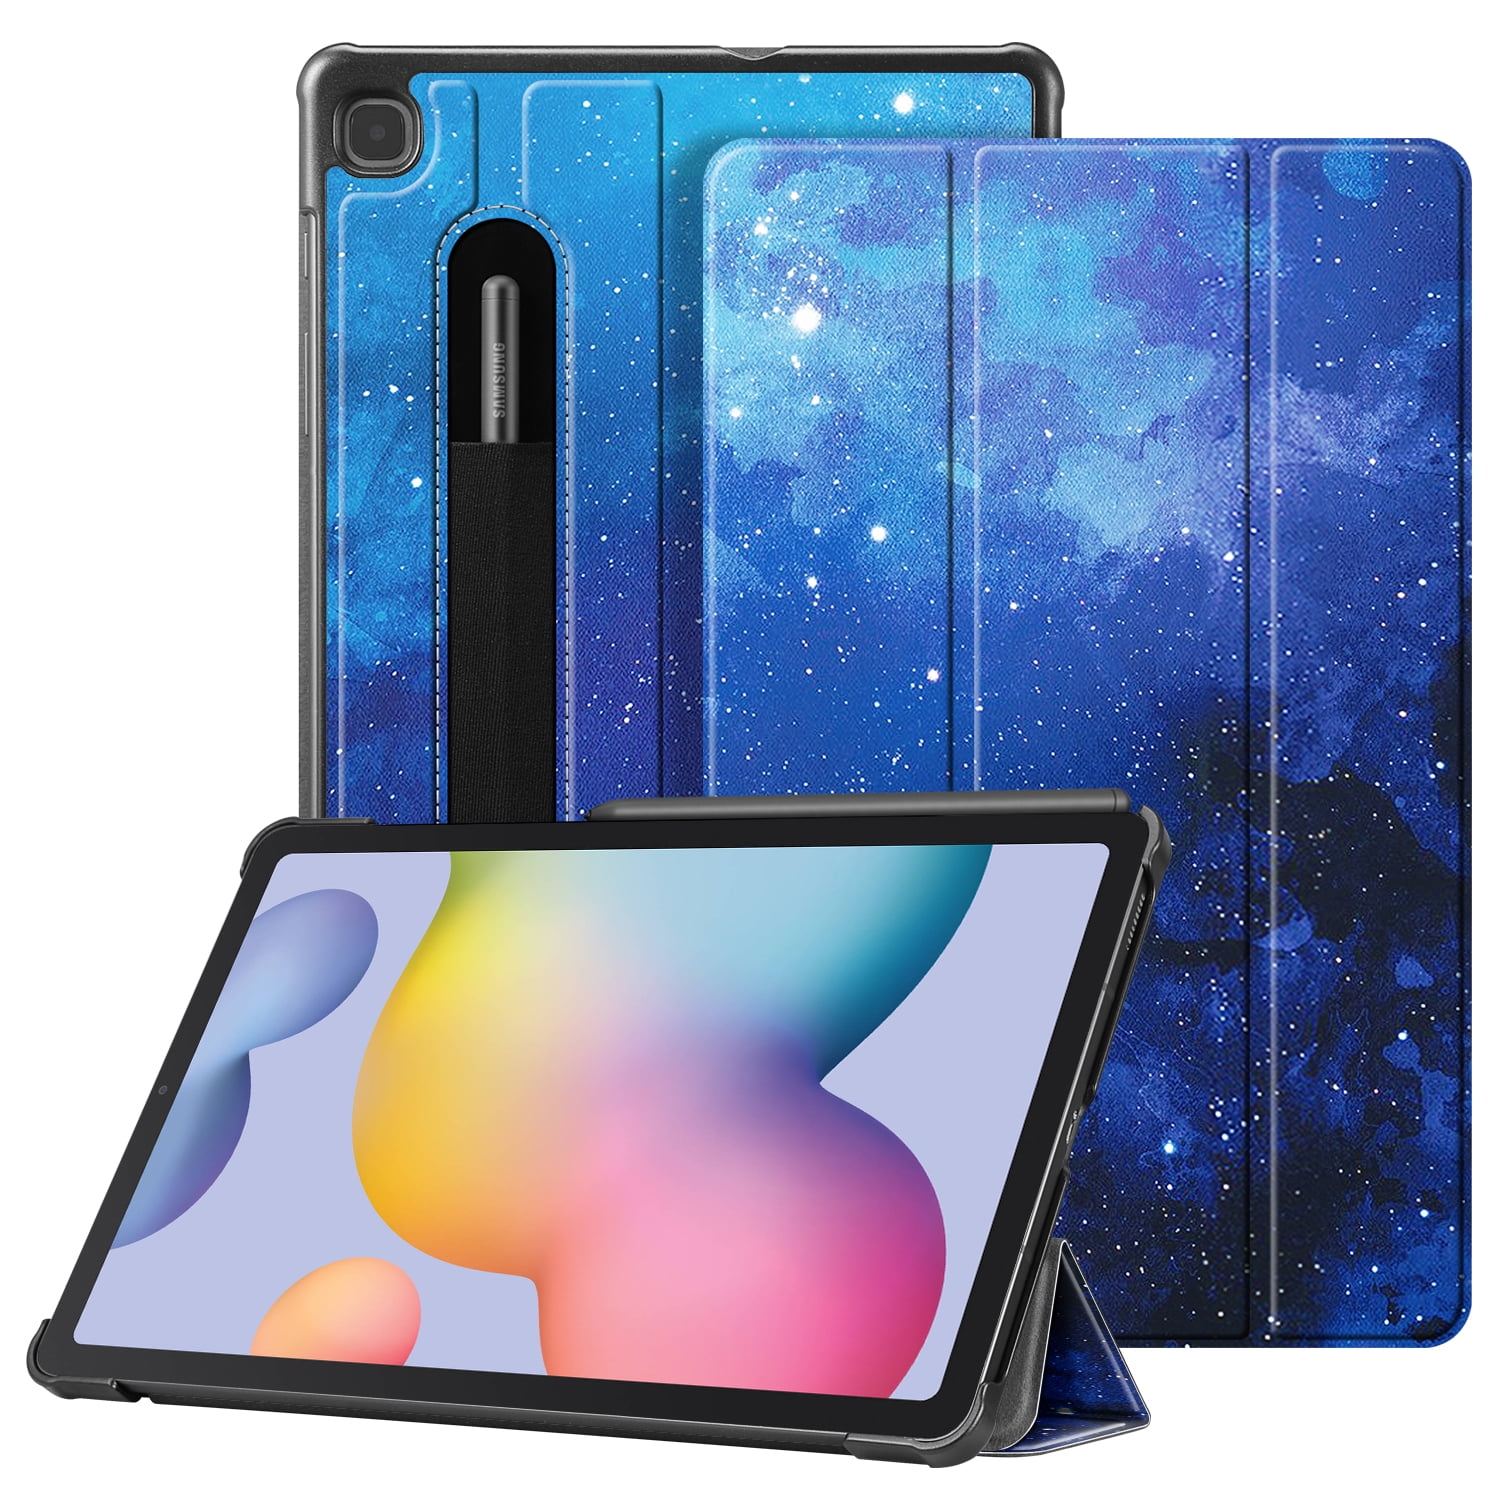 Show album Flawless Fintie Slim Case for Samsung Galaxy Tab S6 Lite 10.4'' 2020 Model SM-P610  (Wi-Fi) SM-P615 (LTE) with S Pen Holder - Lightweight Trifold Stand Hard  Back Cover, Auto Wake/Sleep - Walmart.com